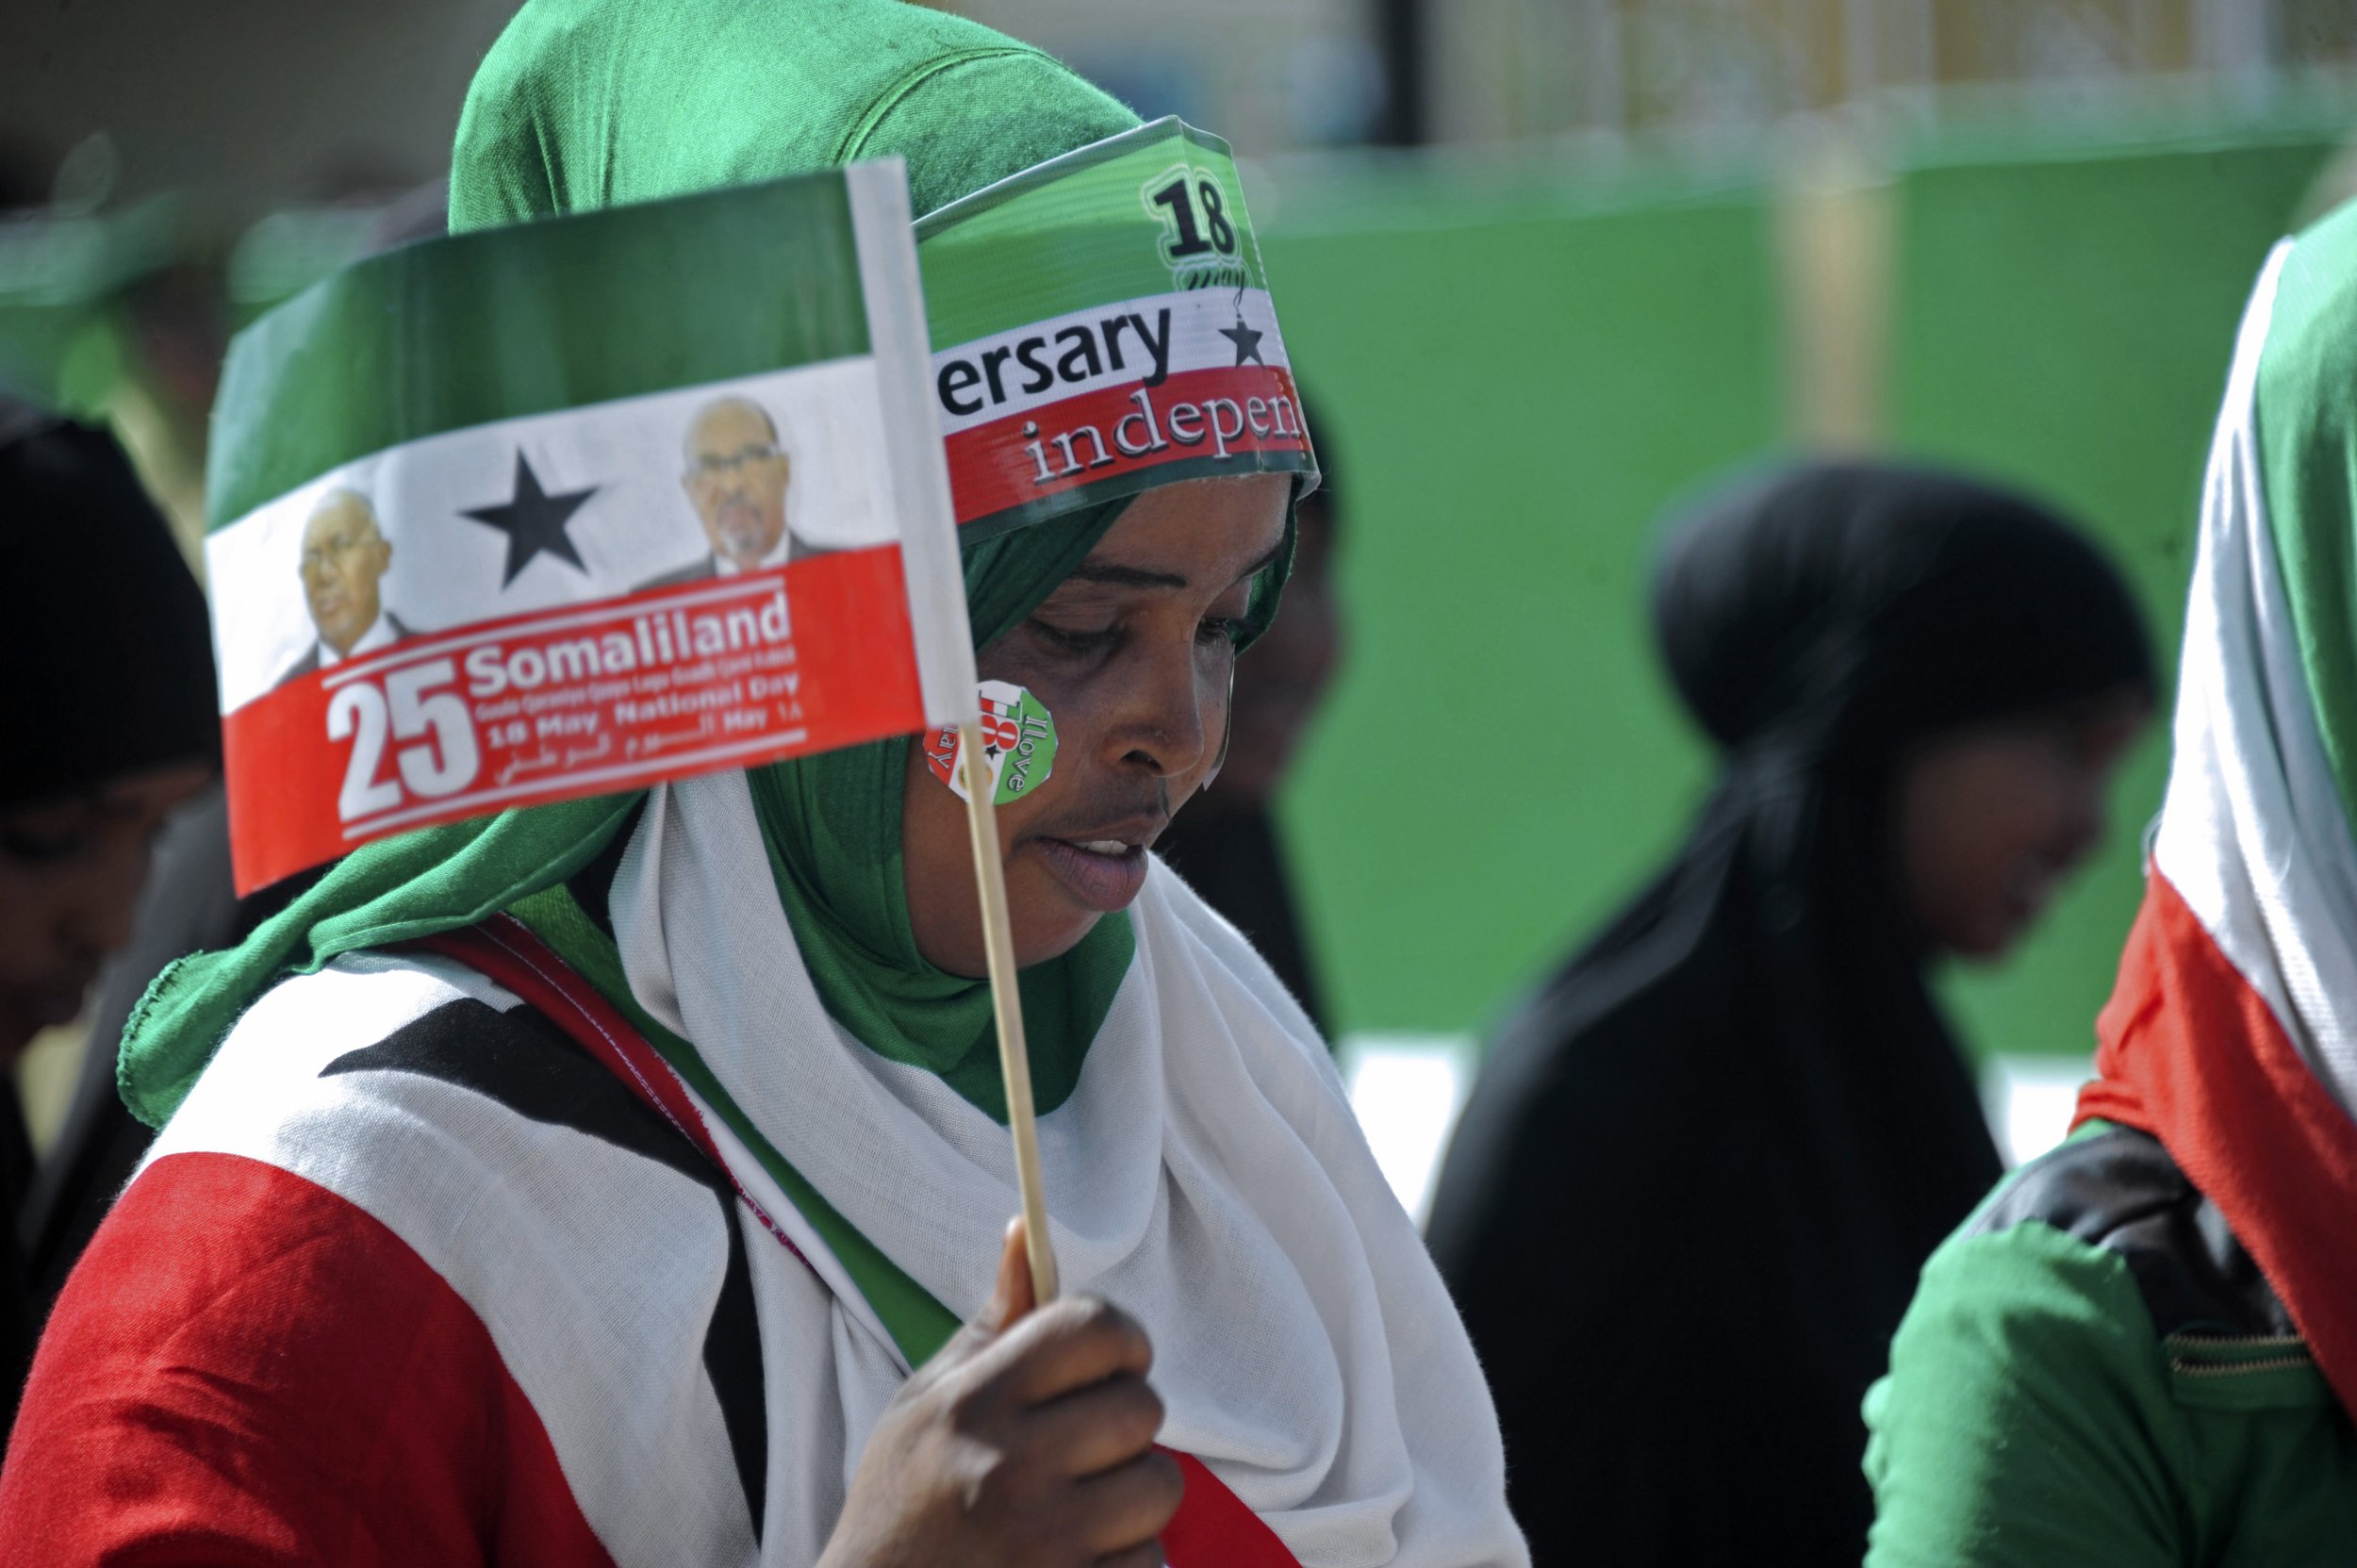 Somaliland independence day